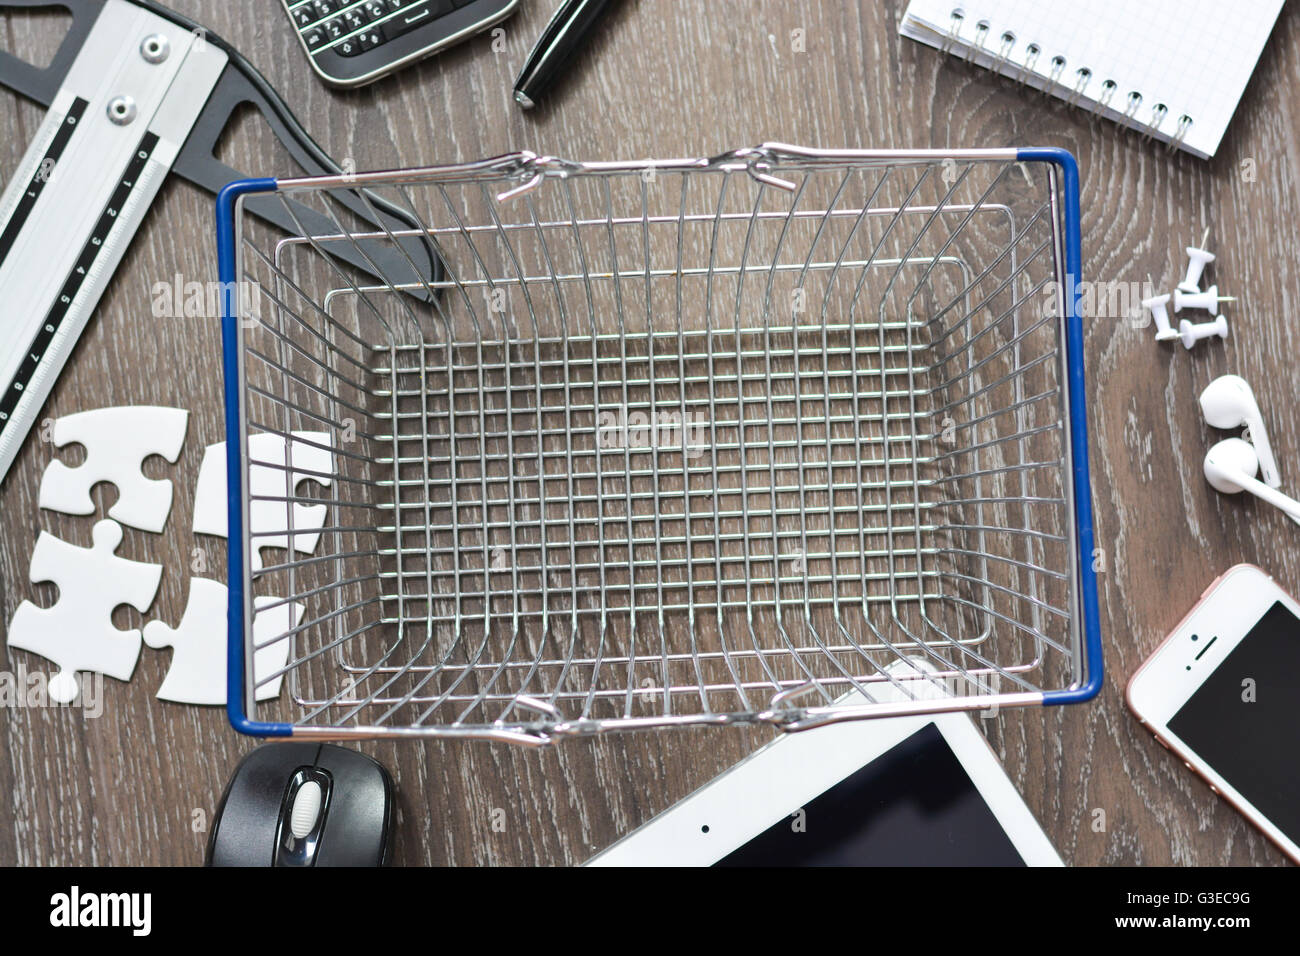 e-commerce concept with shopping cart Stock Photo